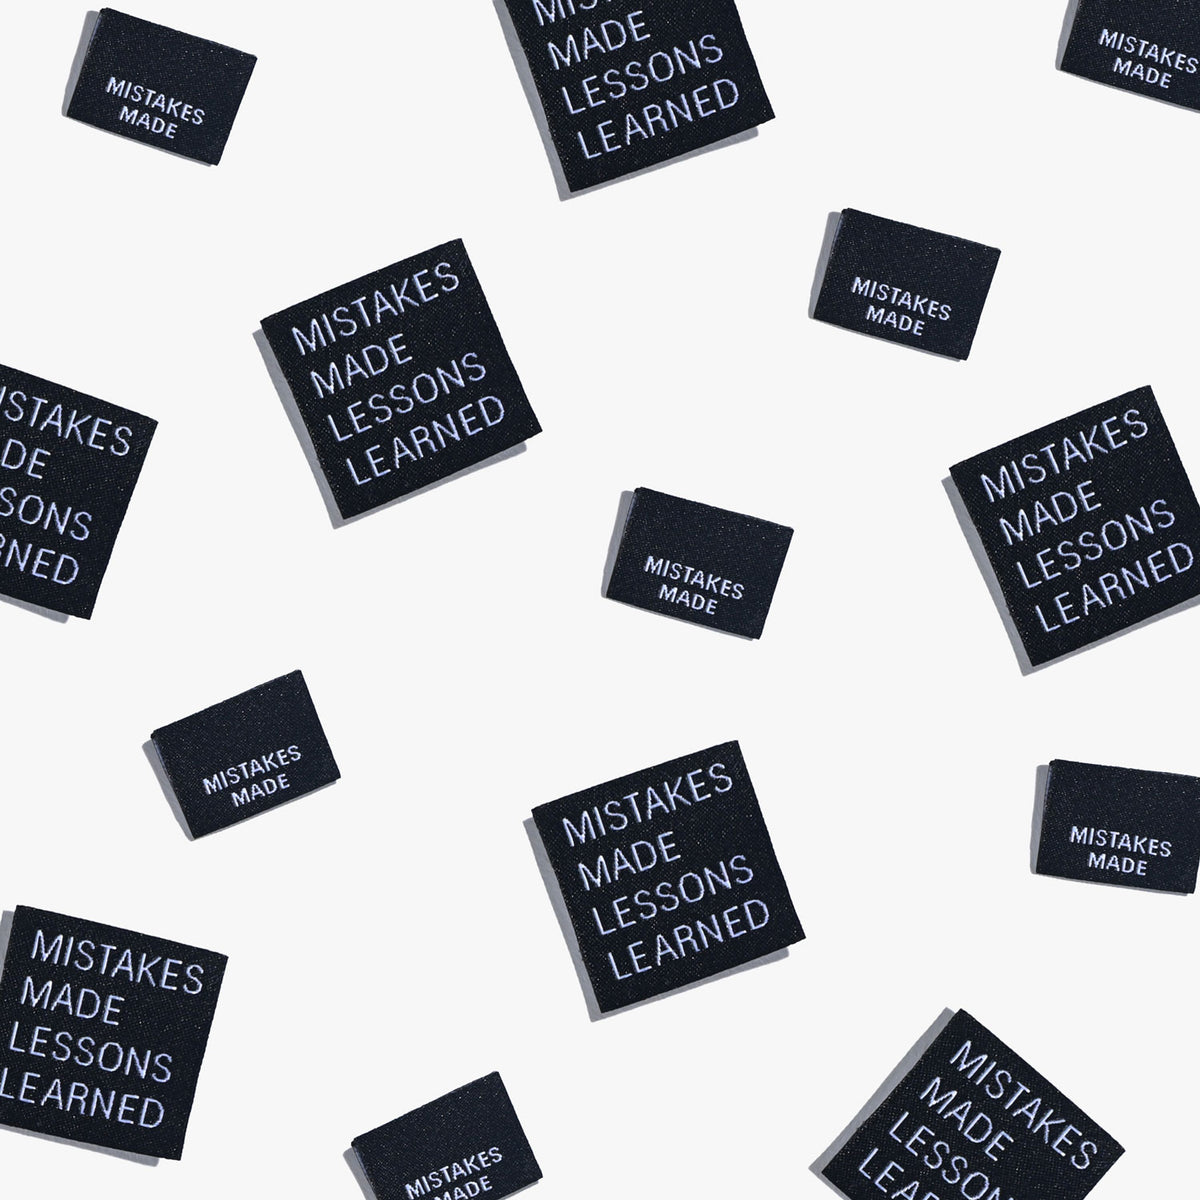 6 Woven Labels - Mistakes made lessons learned